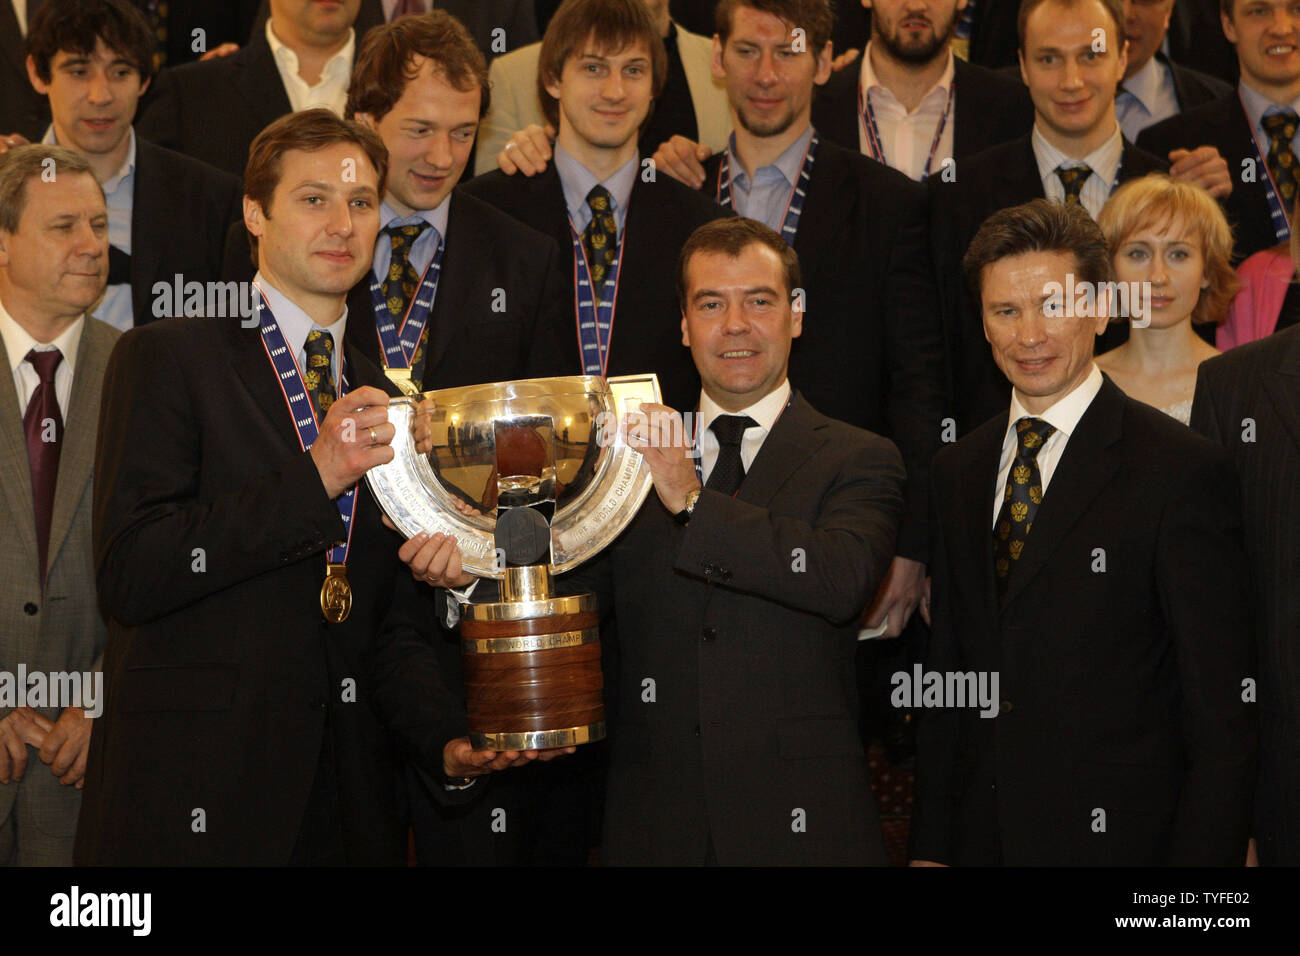 Russian President Dmitry Medvedev (C) holds the World Hockey Championships trophy with captain Alexei Morozov (L) and coach Vyacheslav Bykov (R) during his meeting with the national ice hockey team in the Kremlin in Moscow on May 12, 2009. In the final match on Sunday Russia beat Canada 2-1 and won the gold-medal of the ice hockey world championships. (UPI Photo/Anatoli Zhdanov) Stock Photo